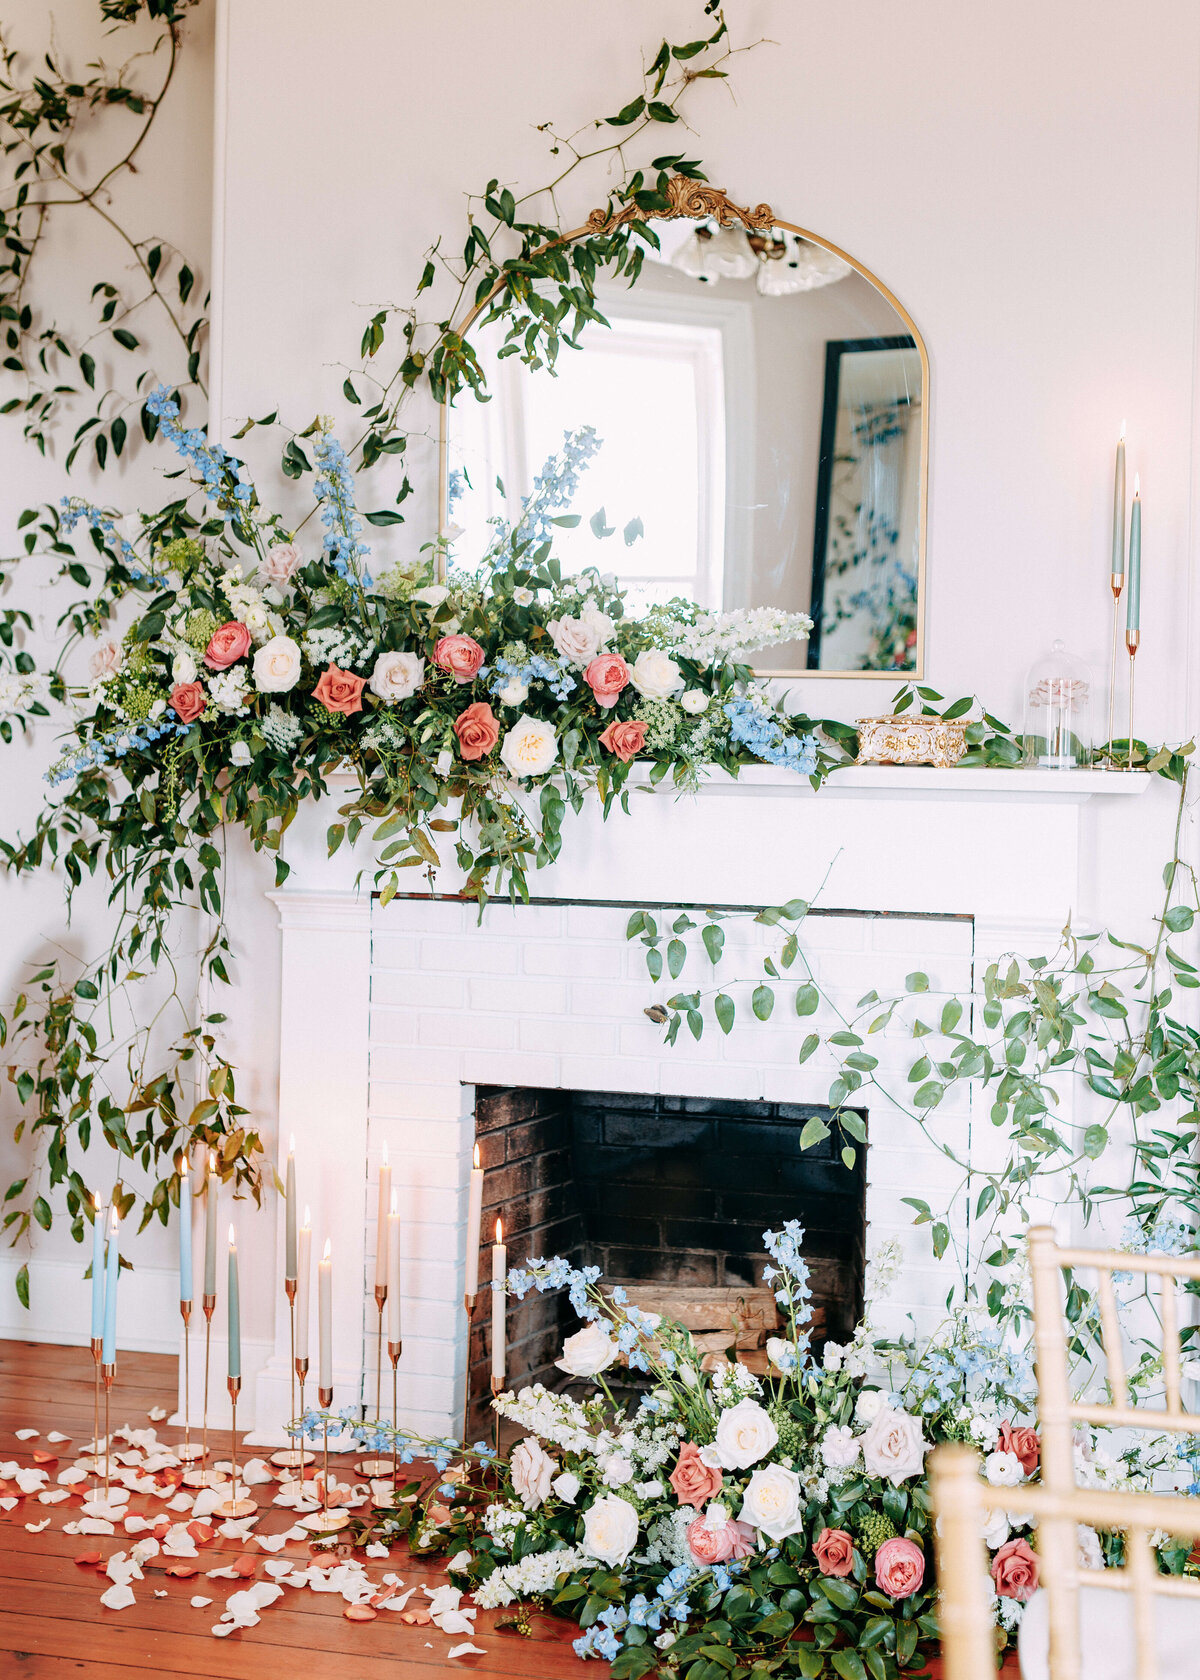 fireplace decorated with large floral displays of blue, peach and ivory blooms